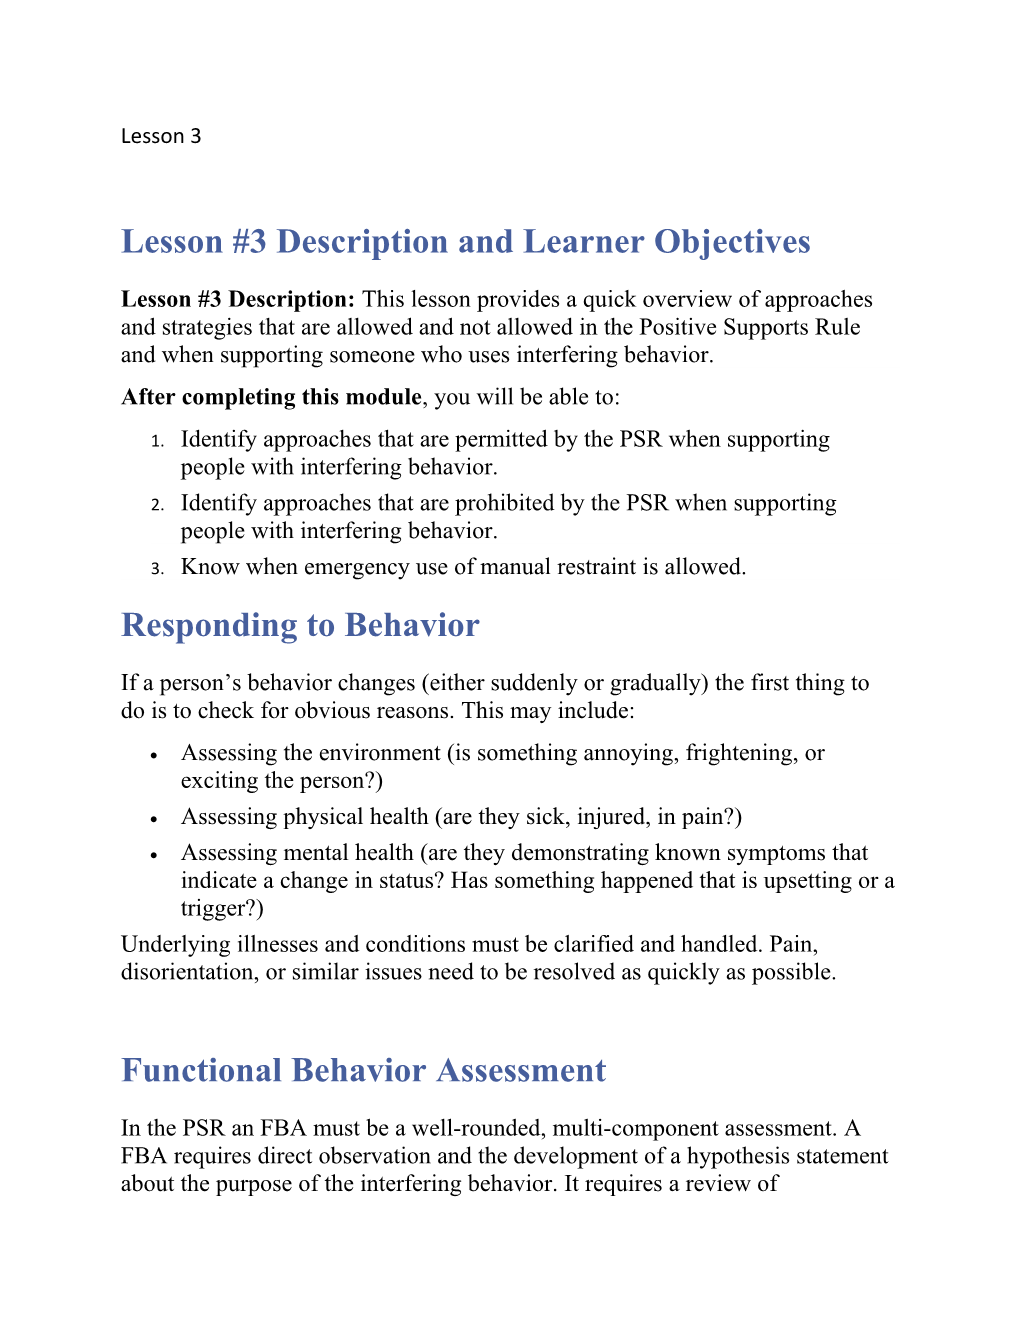 Lesson #3 Description and Learner Objectives